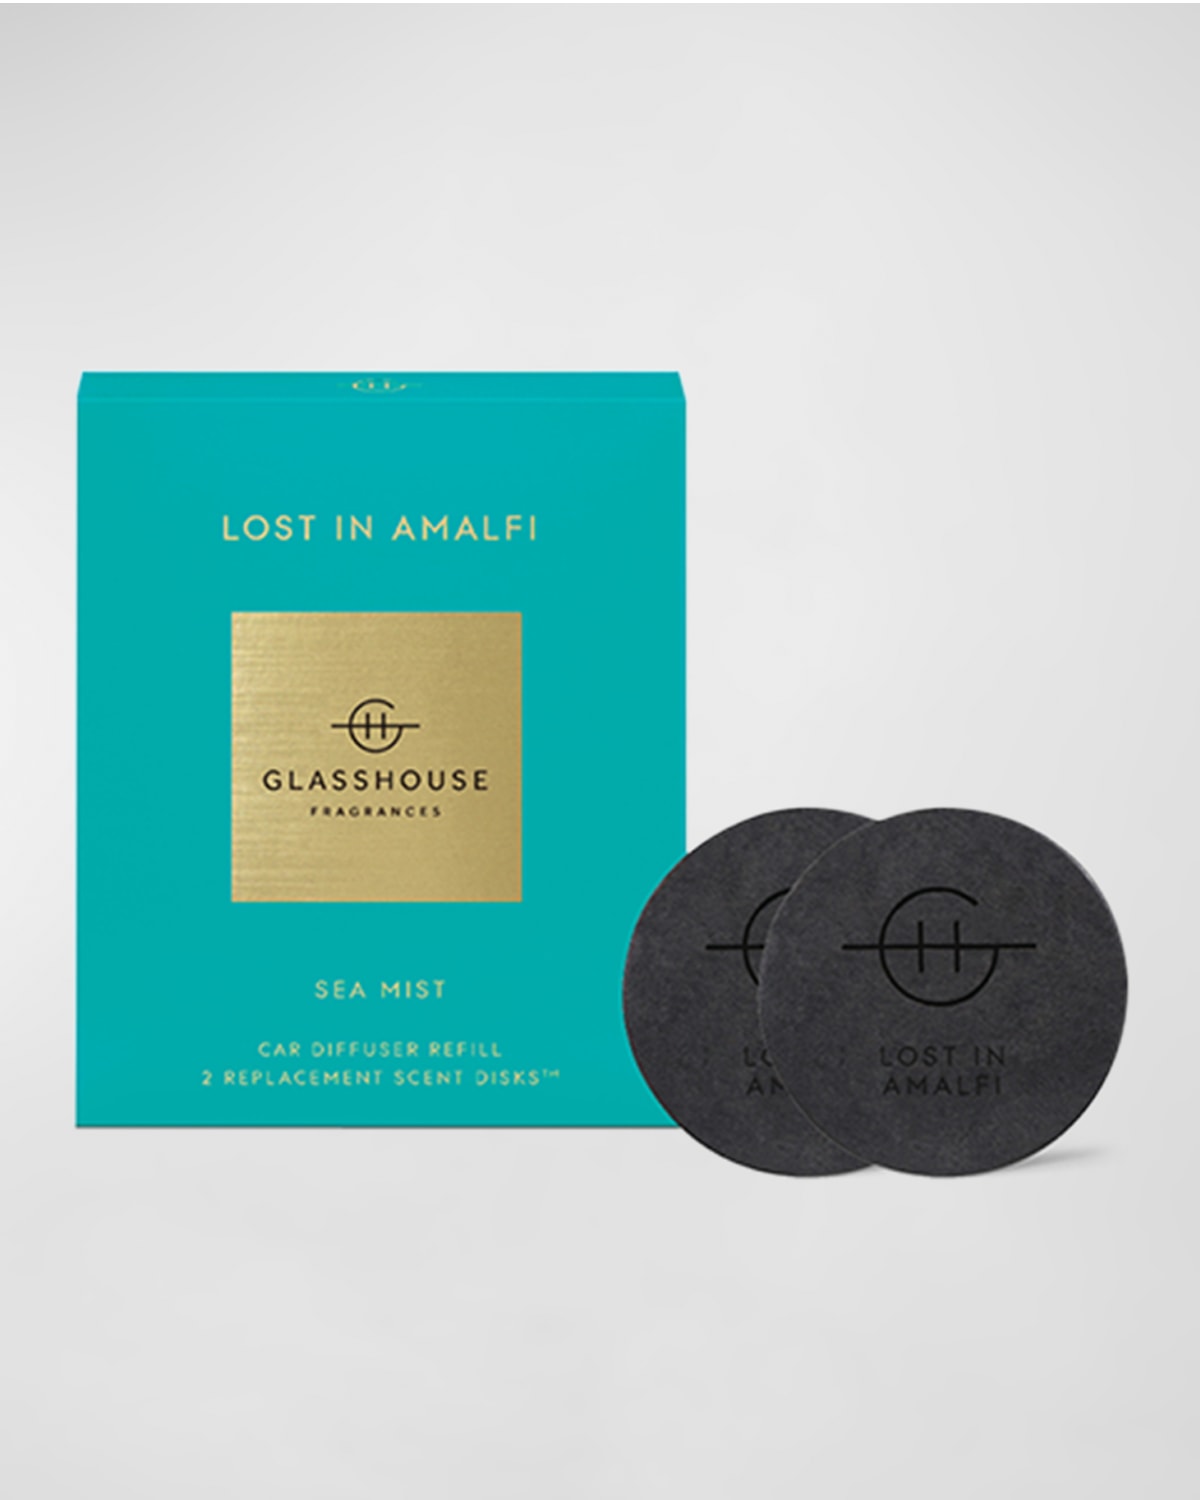 Lost in Amalfi Car Diffuser Replacement Scent Disks, Set of 2